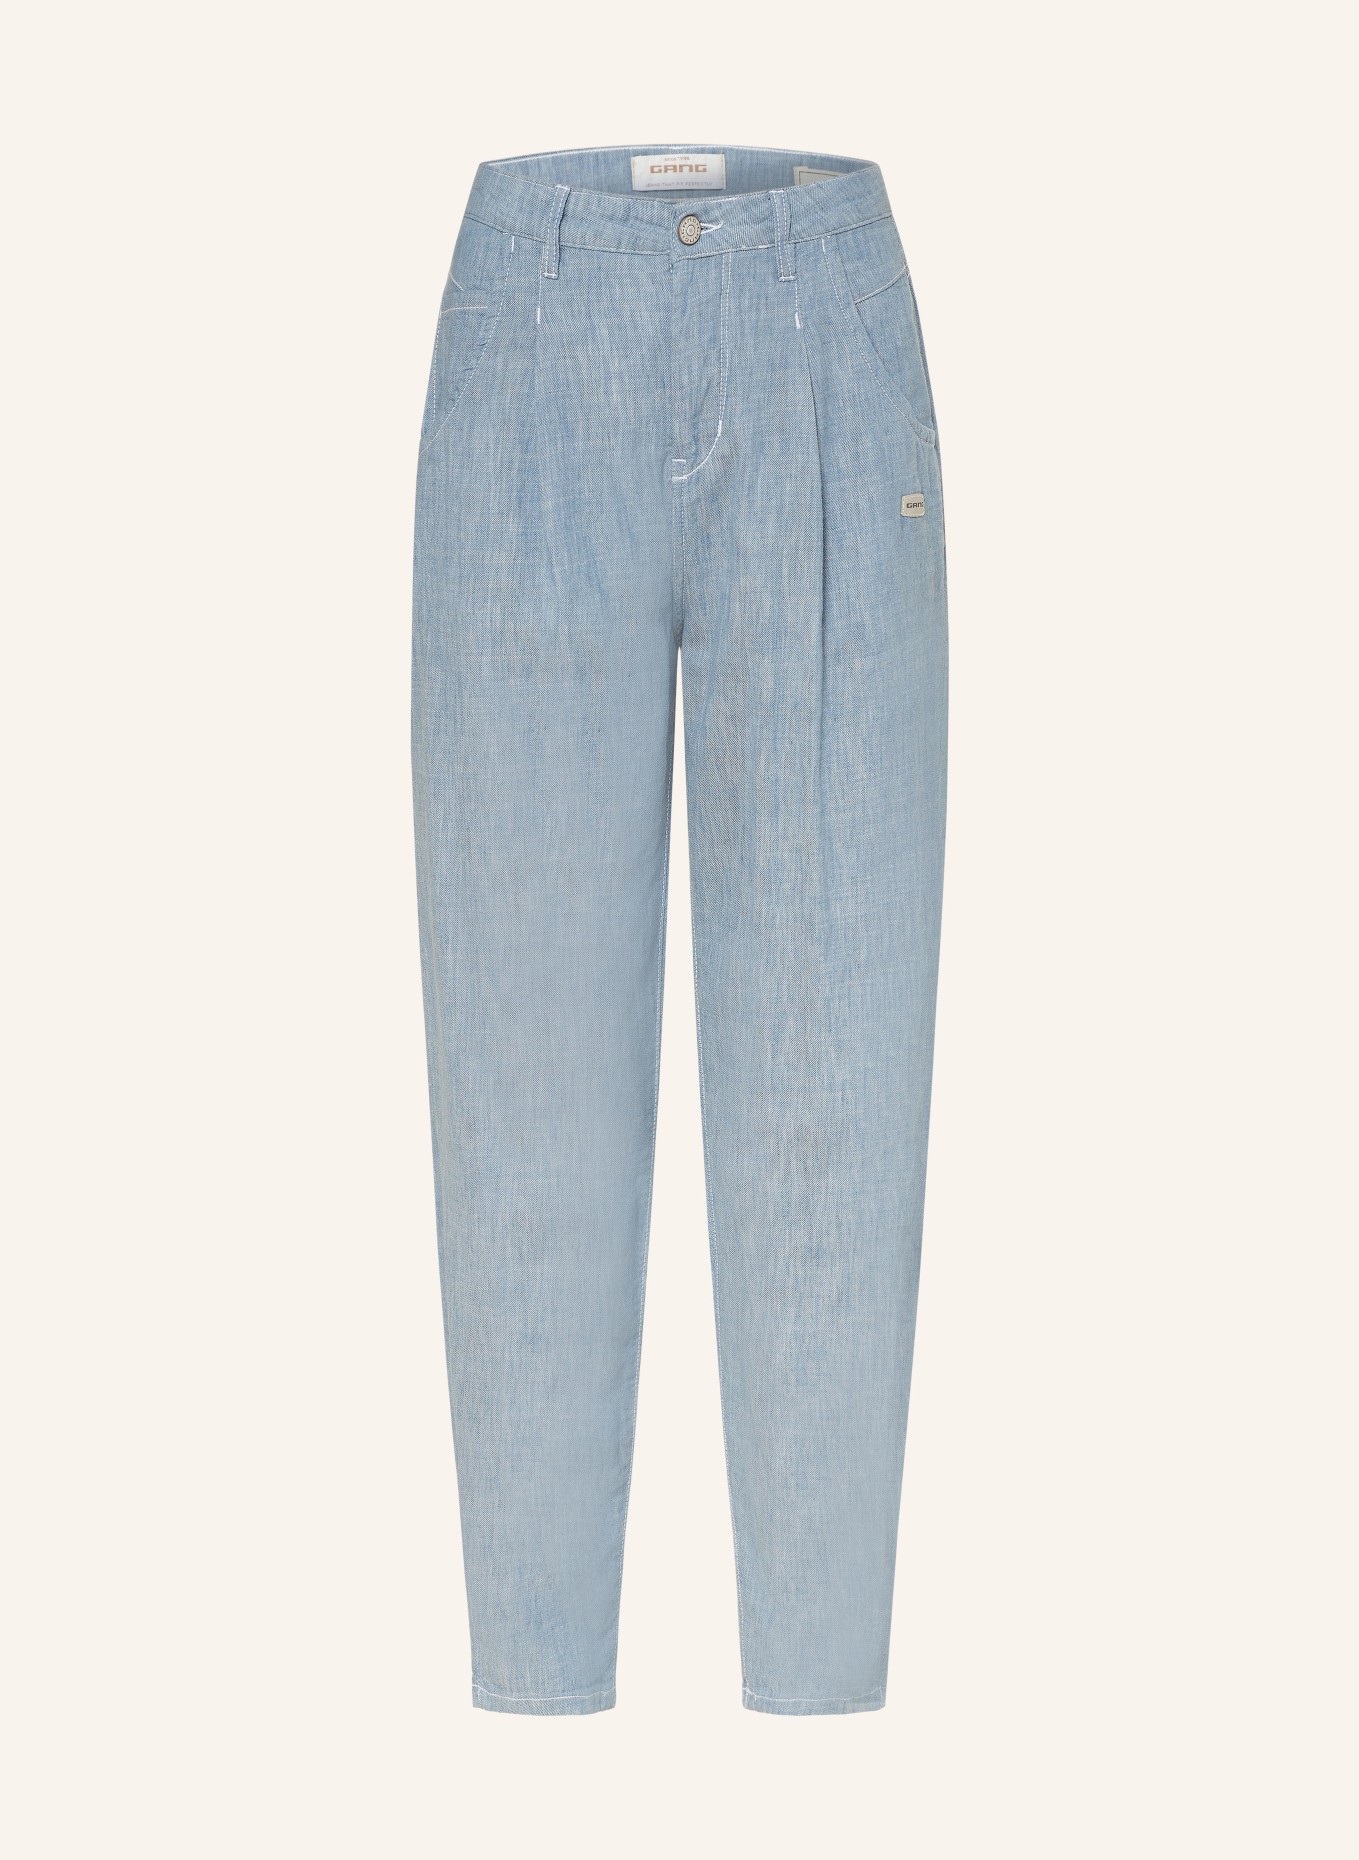 GANG Trousers 94SILVIA in denim look, Color: 6503 ice blue (Image 1)